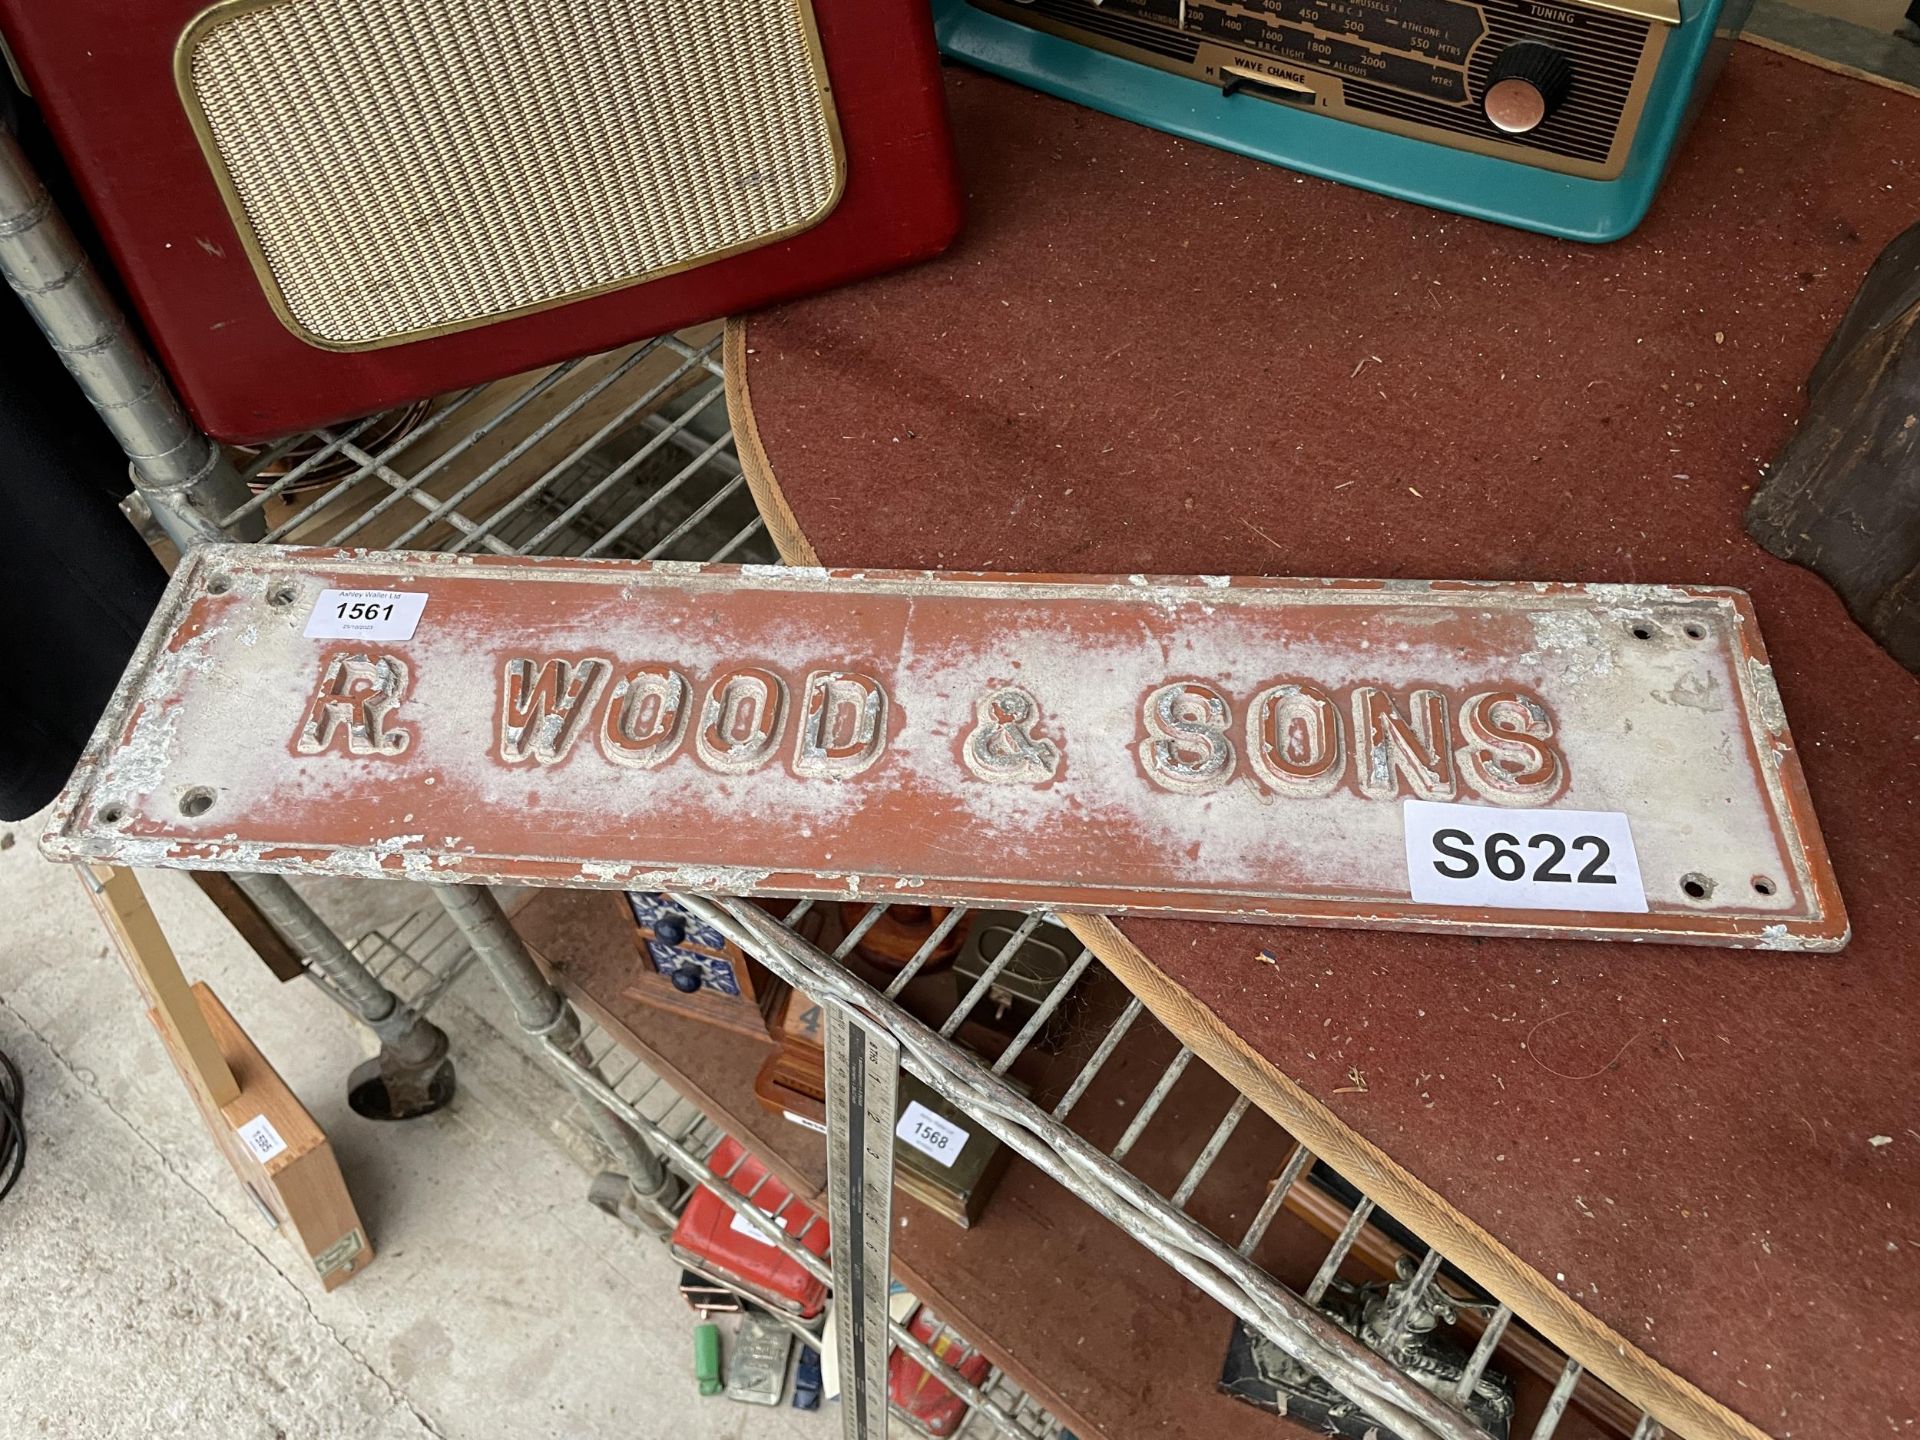 A CAST ALLOY 'R WOOD & SONS' SIGN